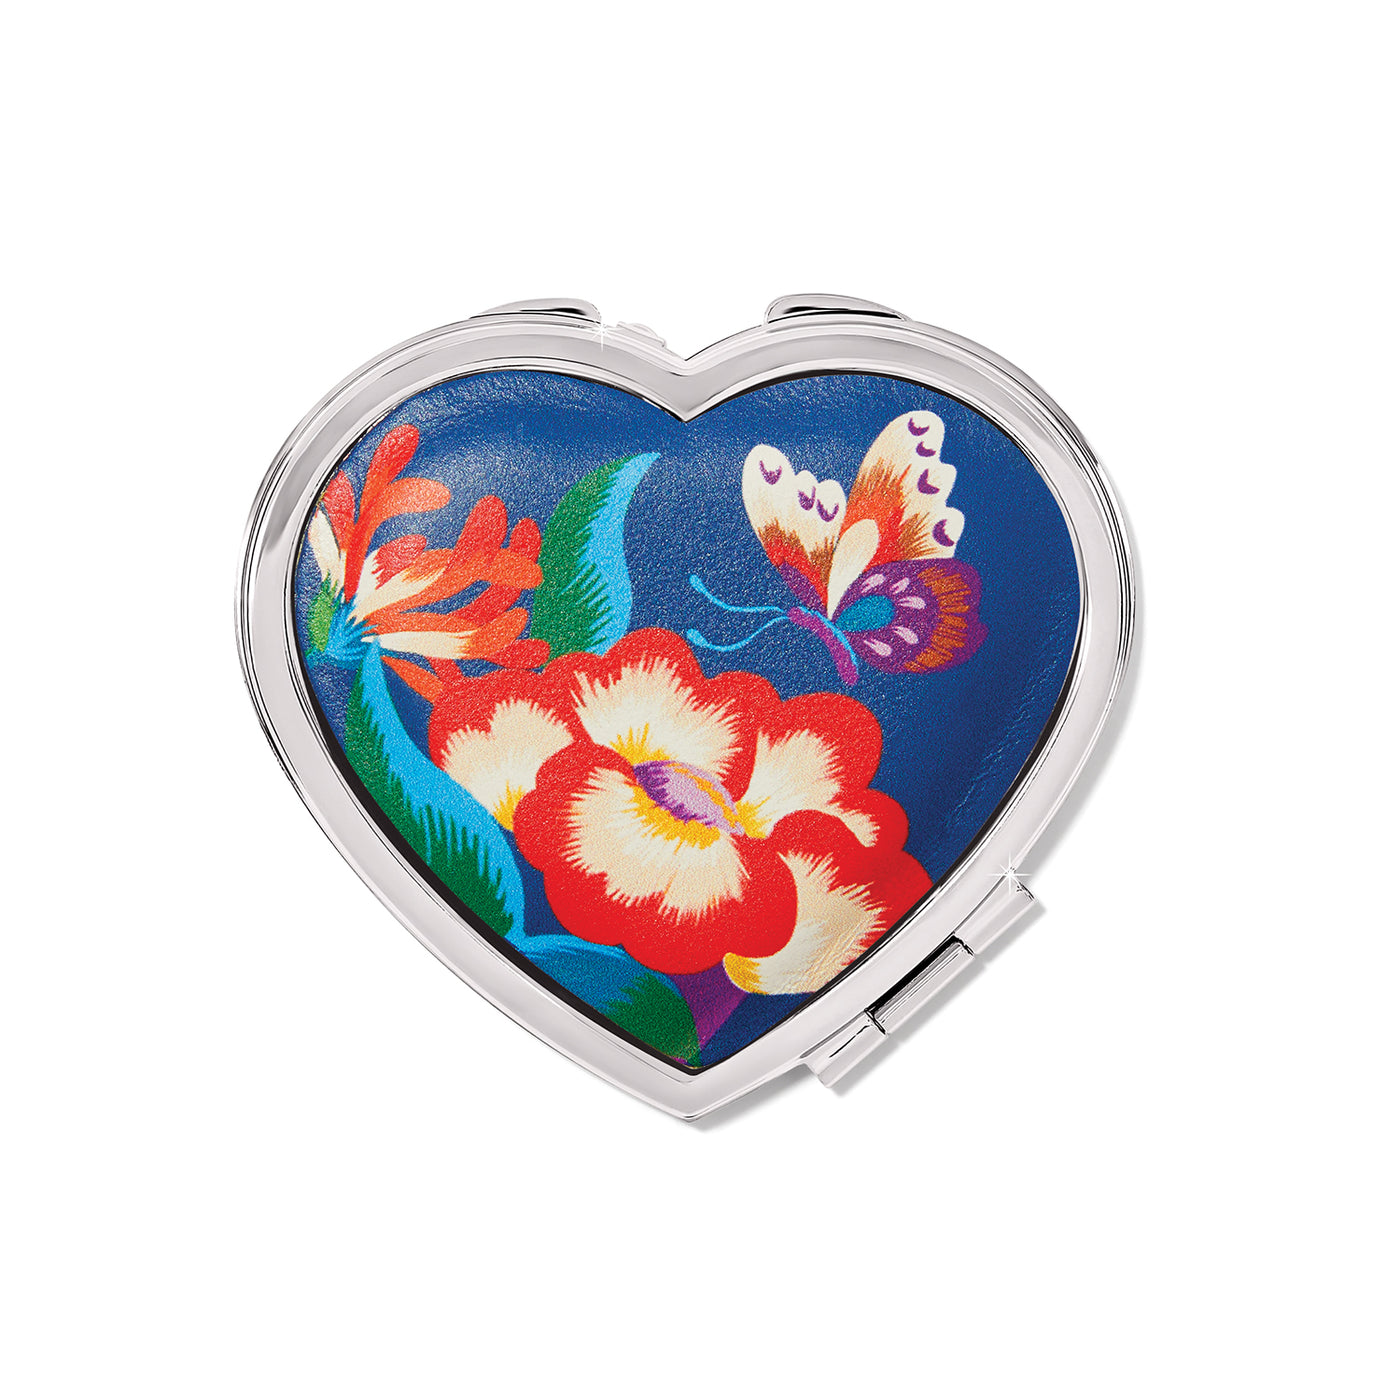 Mlt Kyoto In Bloom Heart Compact Mirror